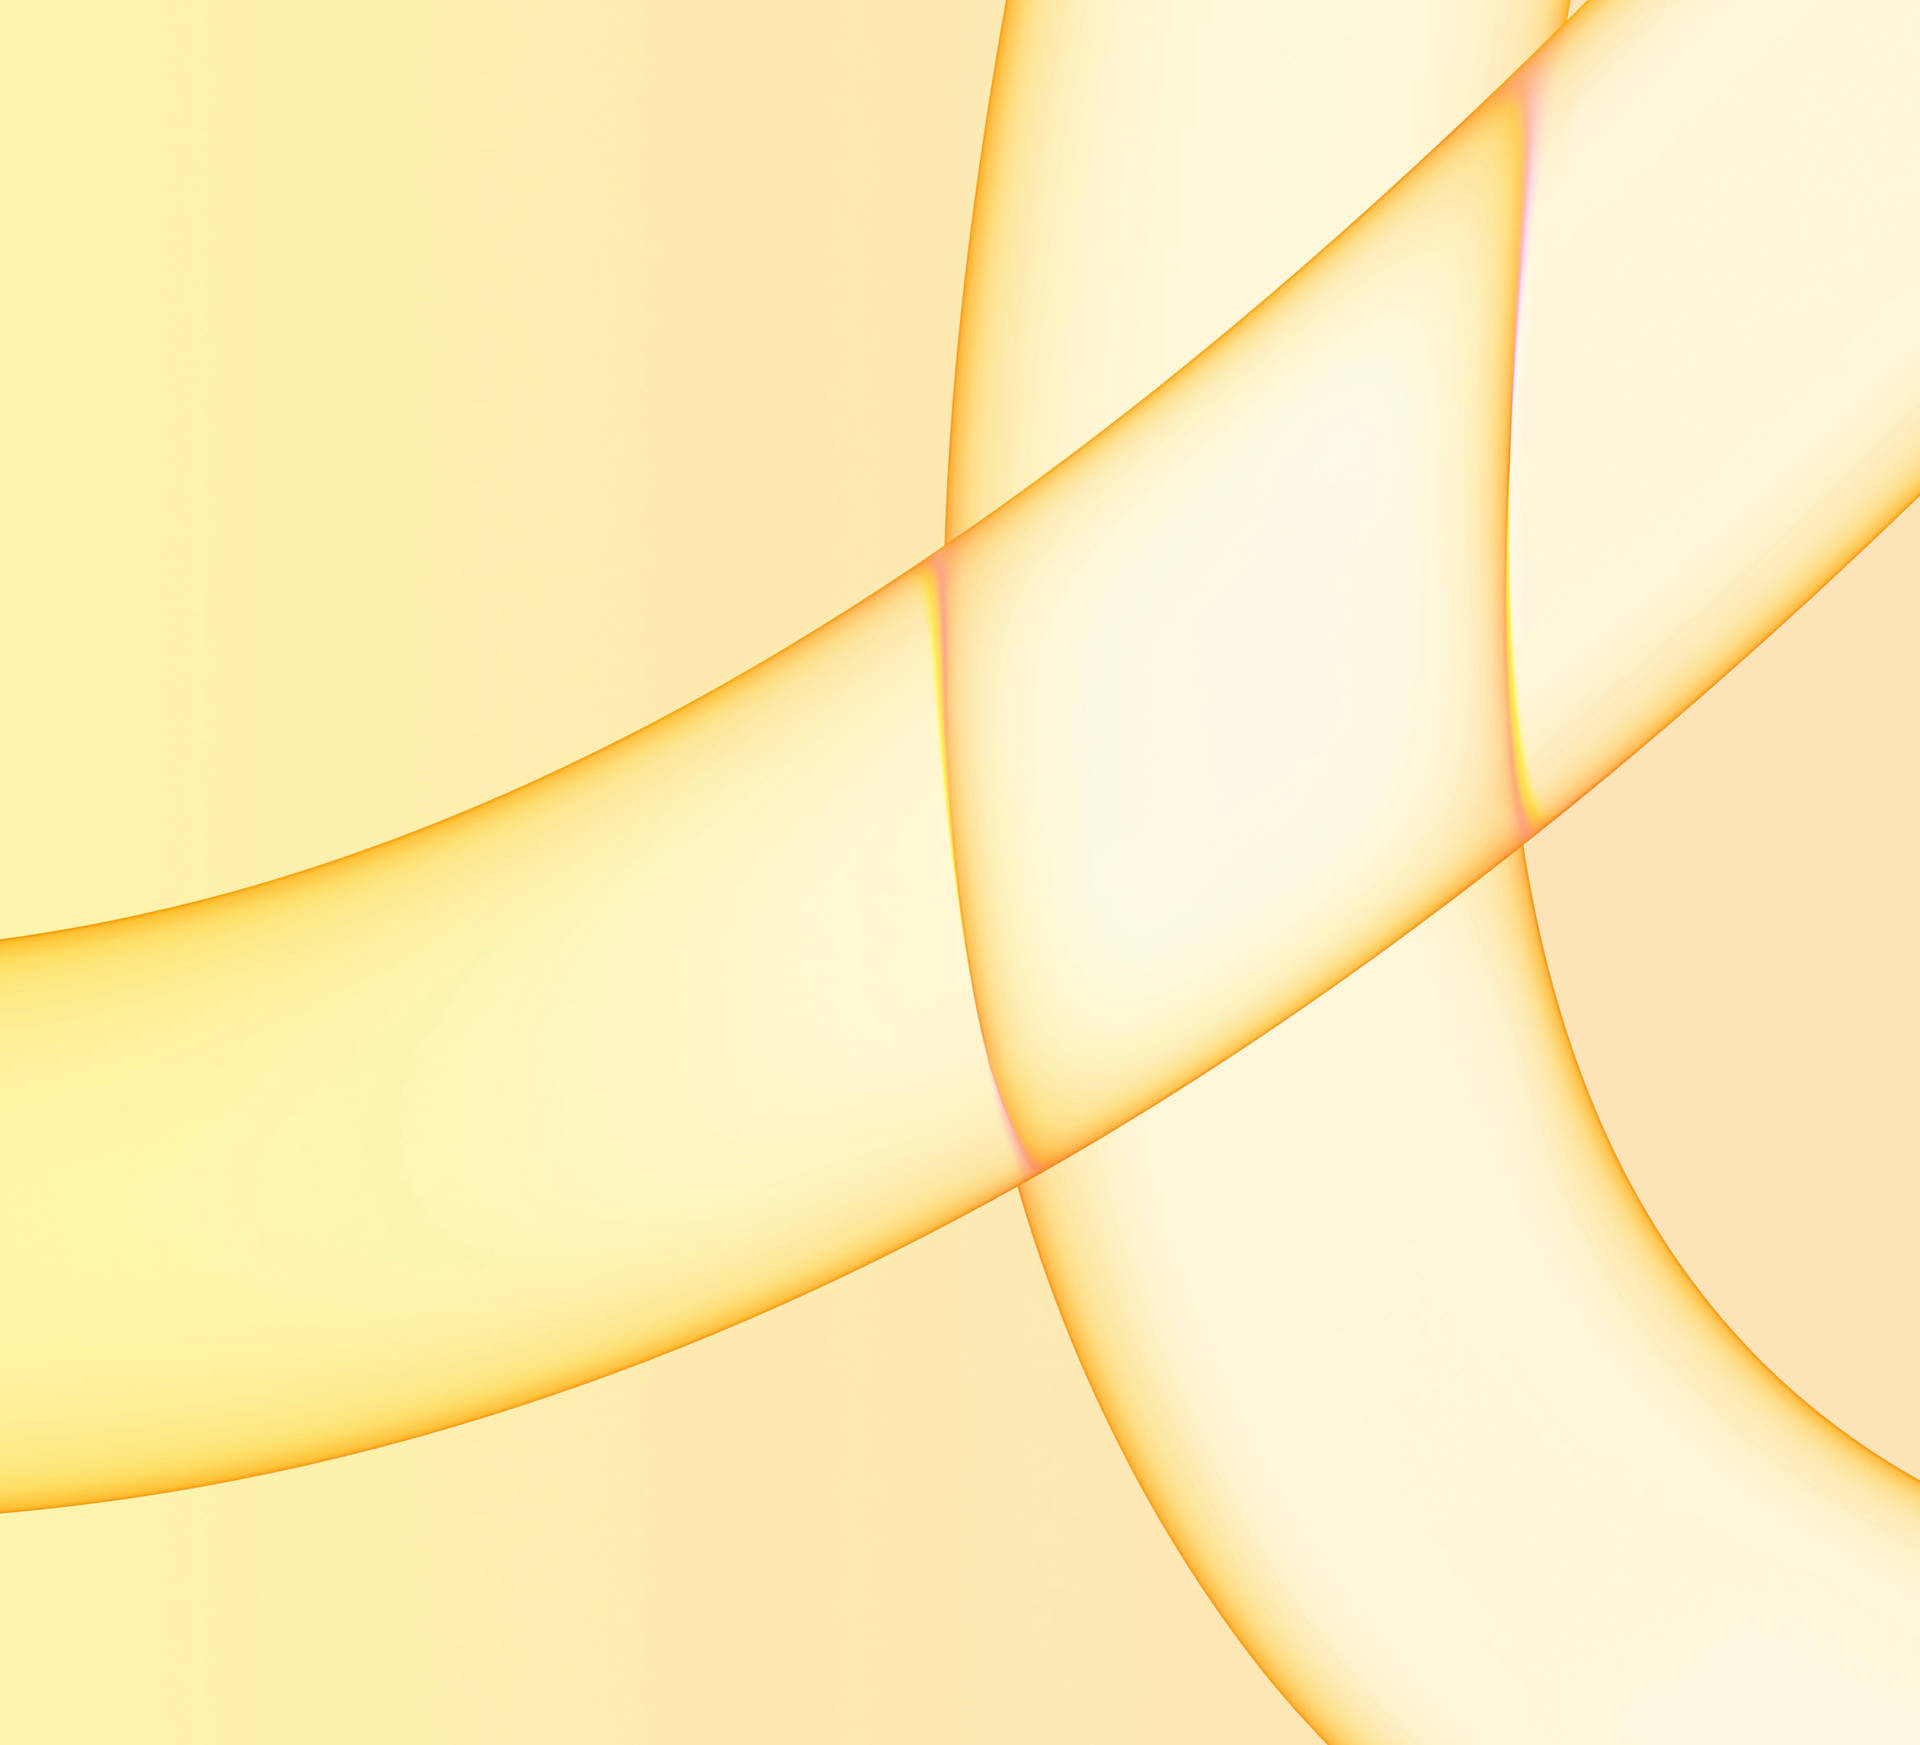 Light Yellow Background With Lines iMac 4K Wallpaper